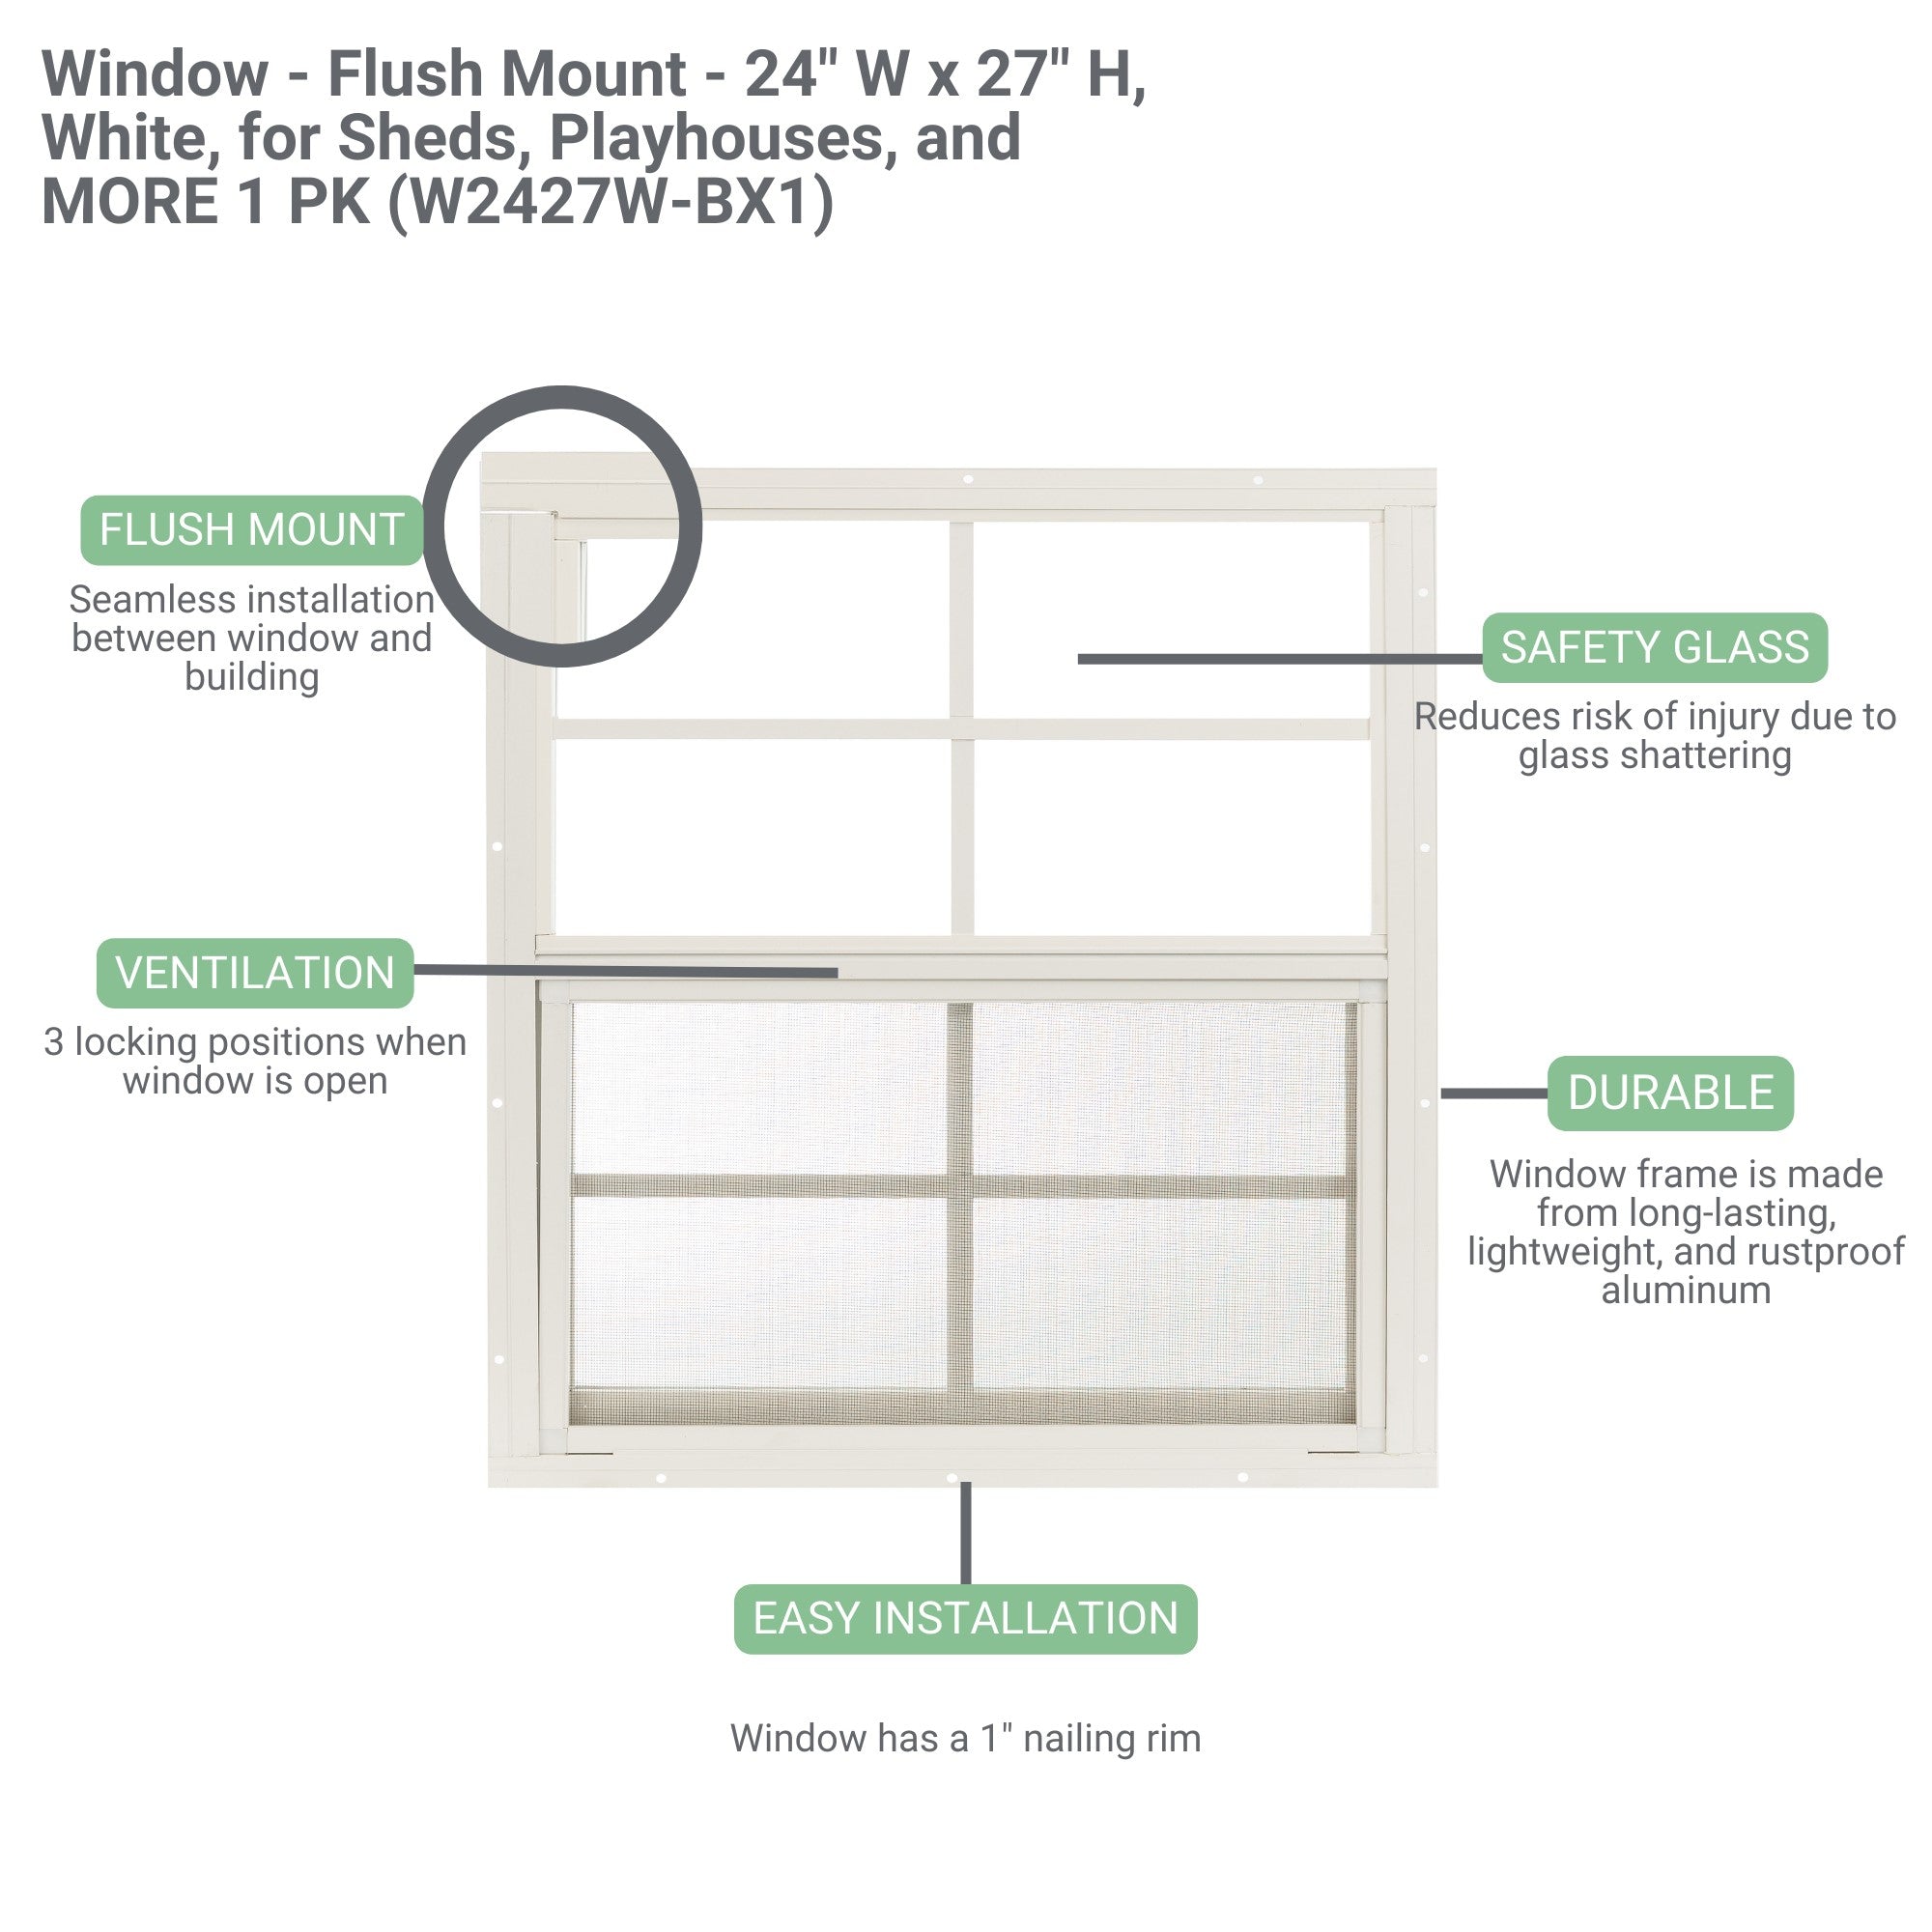 24" W x 27" H Single Hung Flush Mount Shed Window  with 4 Grids for Sheds, Playhouses, and MORE